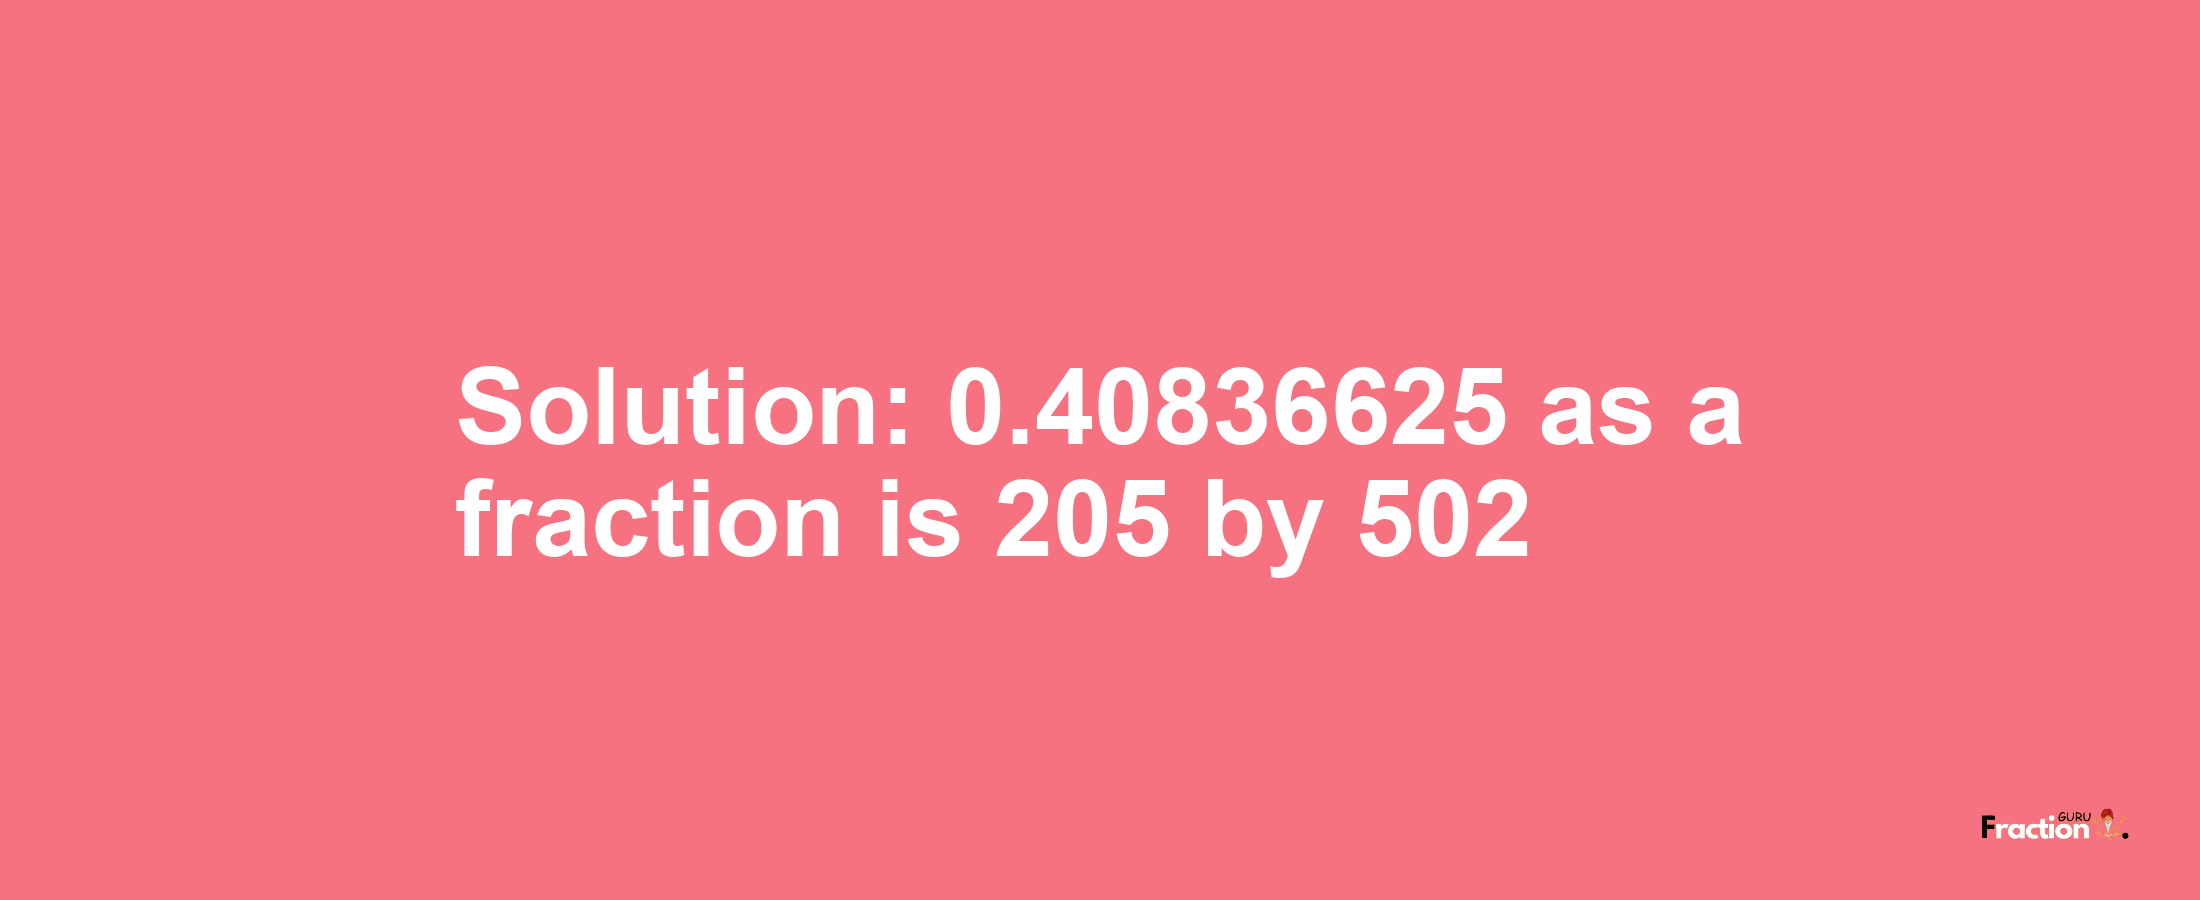 Solution:0.40836625 as a fraction is 205/502